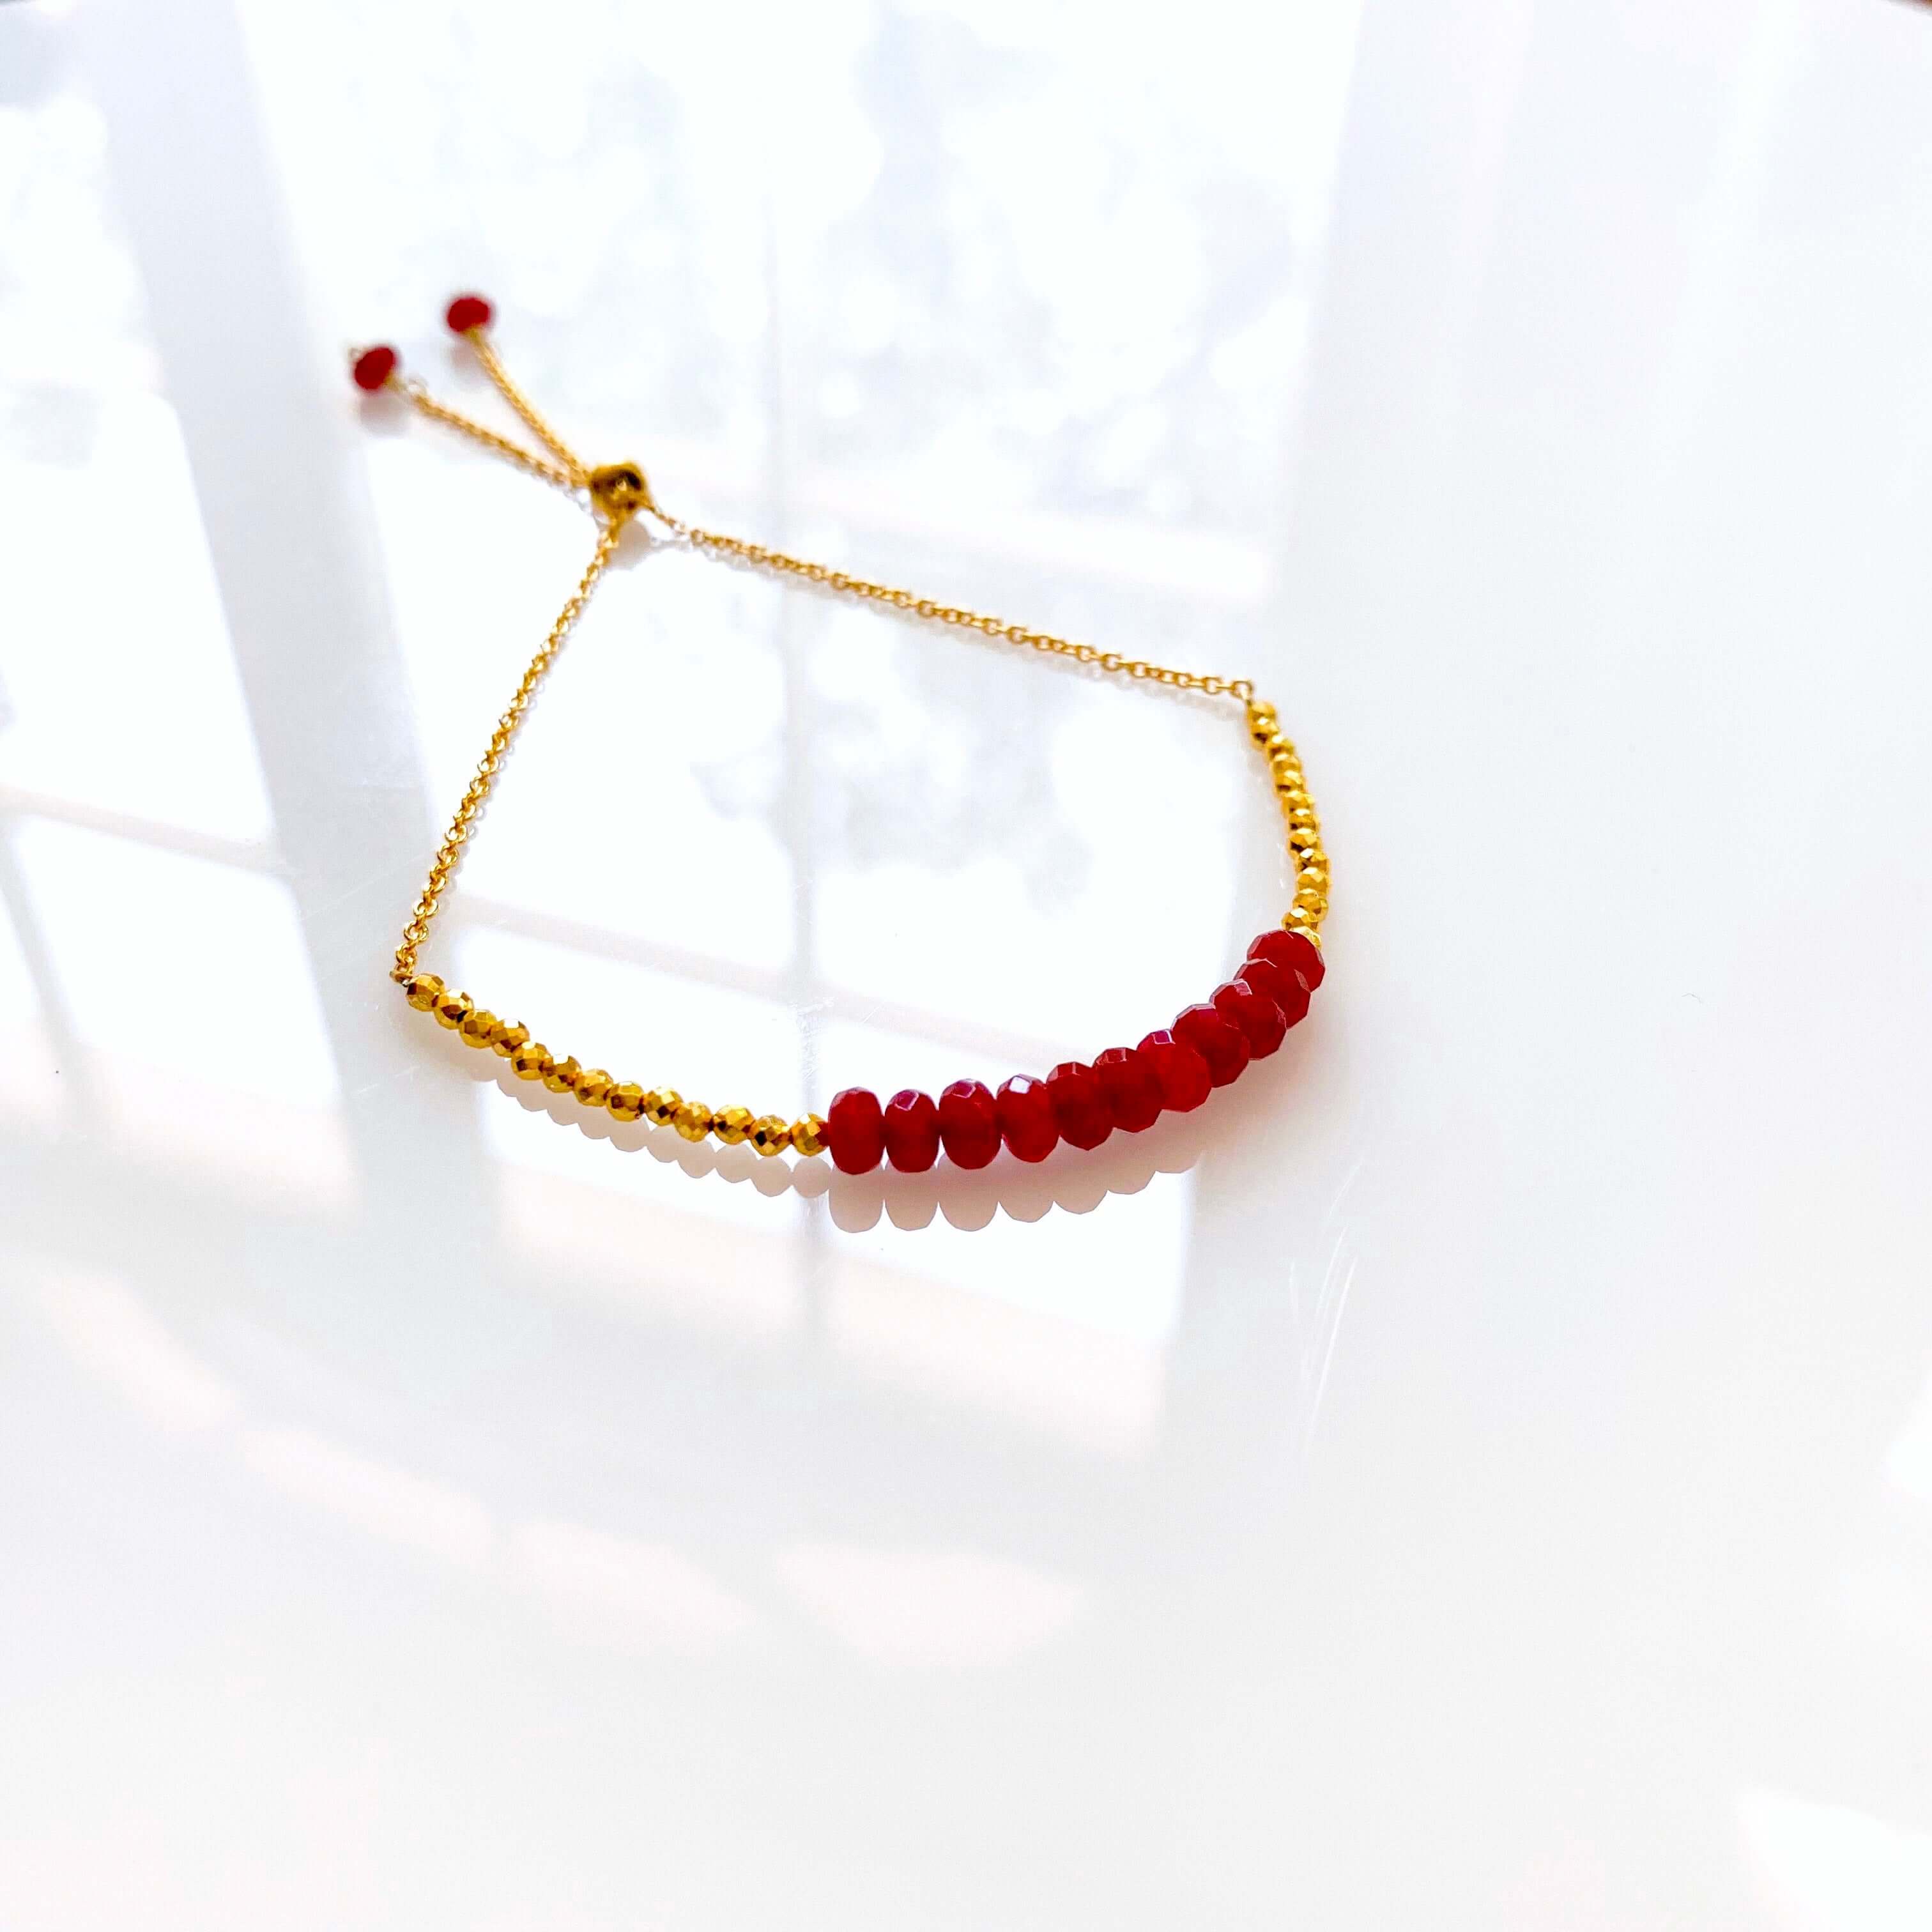 Gold Bracelet  with Red Jade Gemstone and Gold Accent Beads